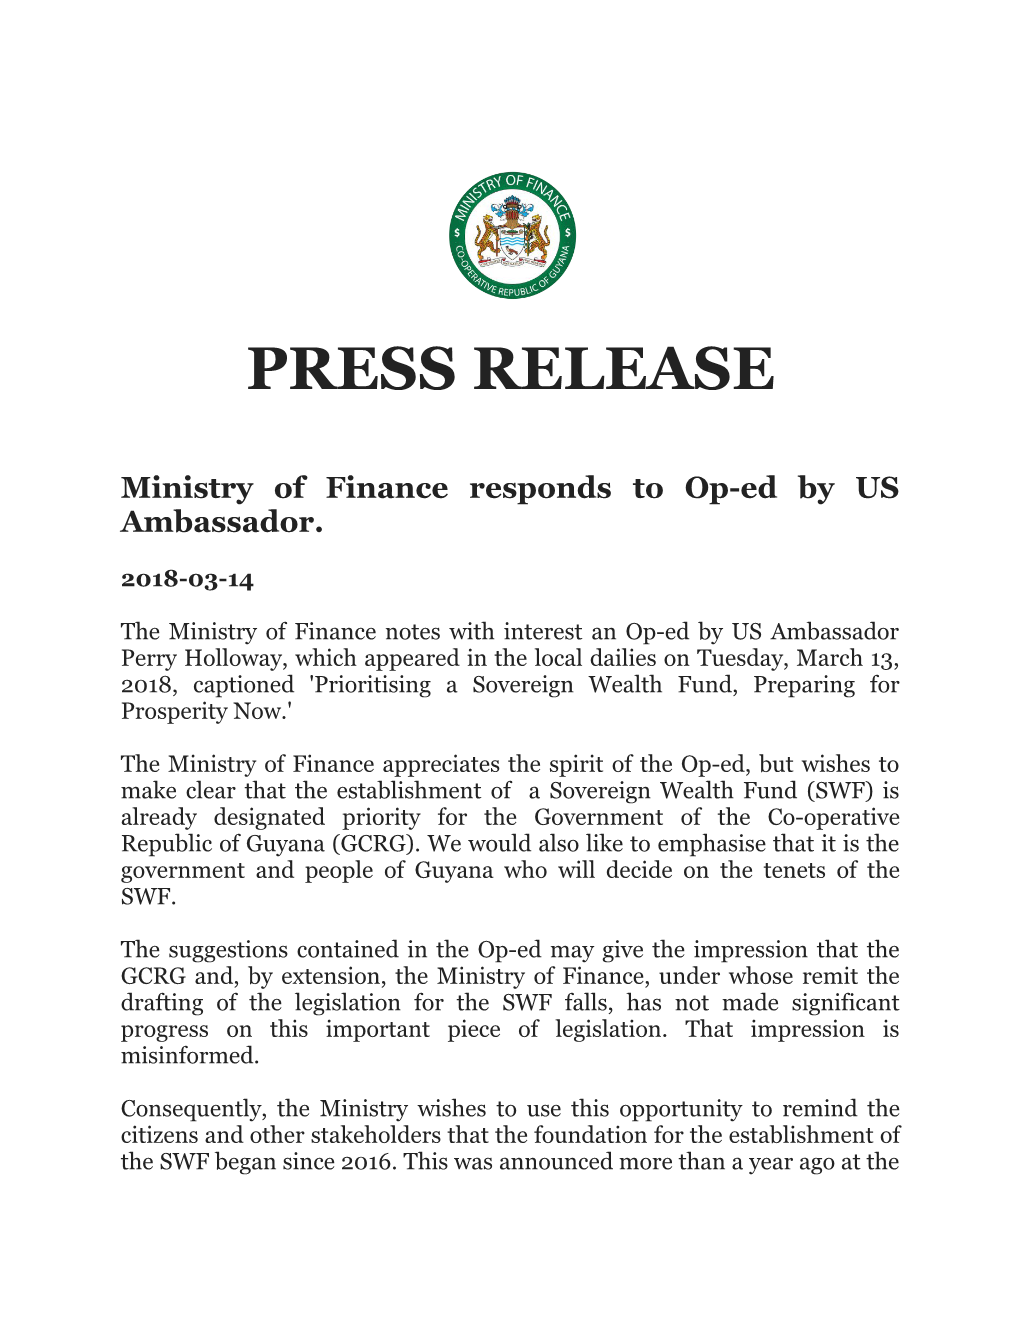 Ministry of Finance Responds to Op-Ed by US Ambassador